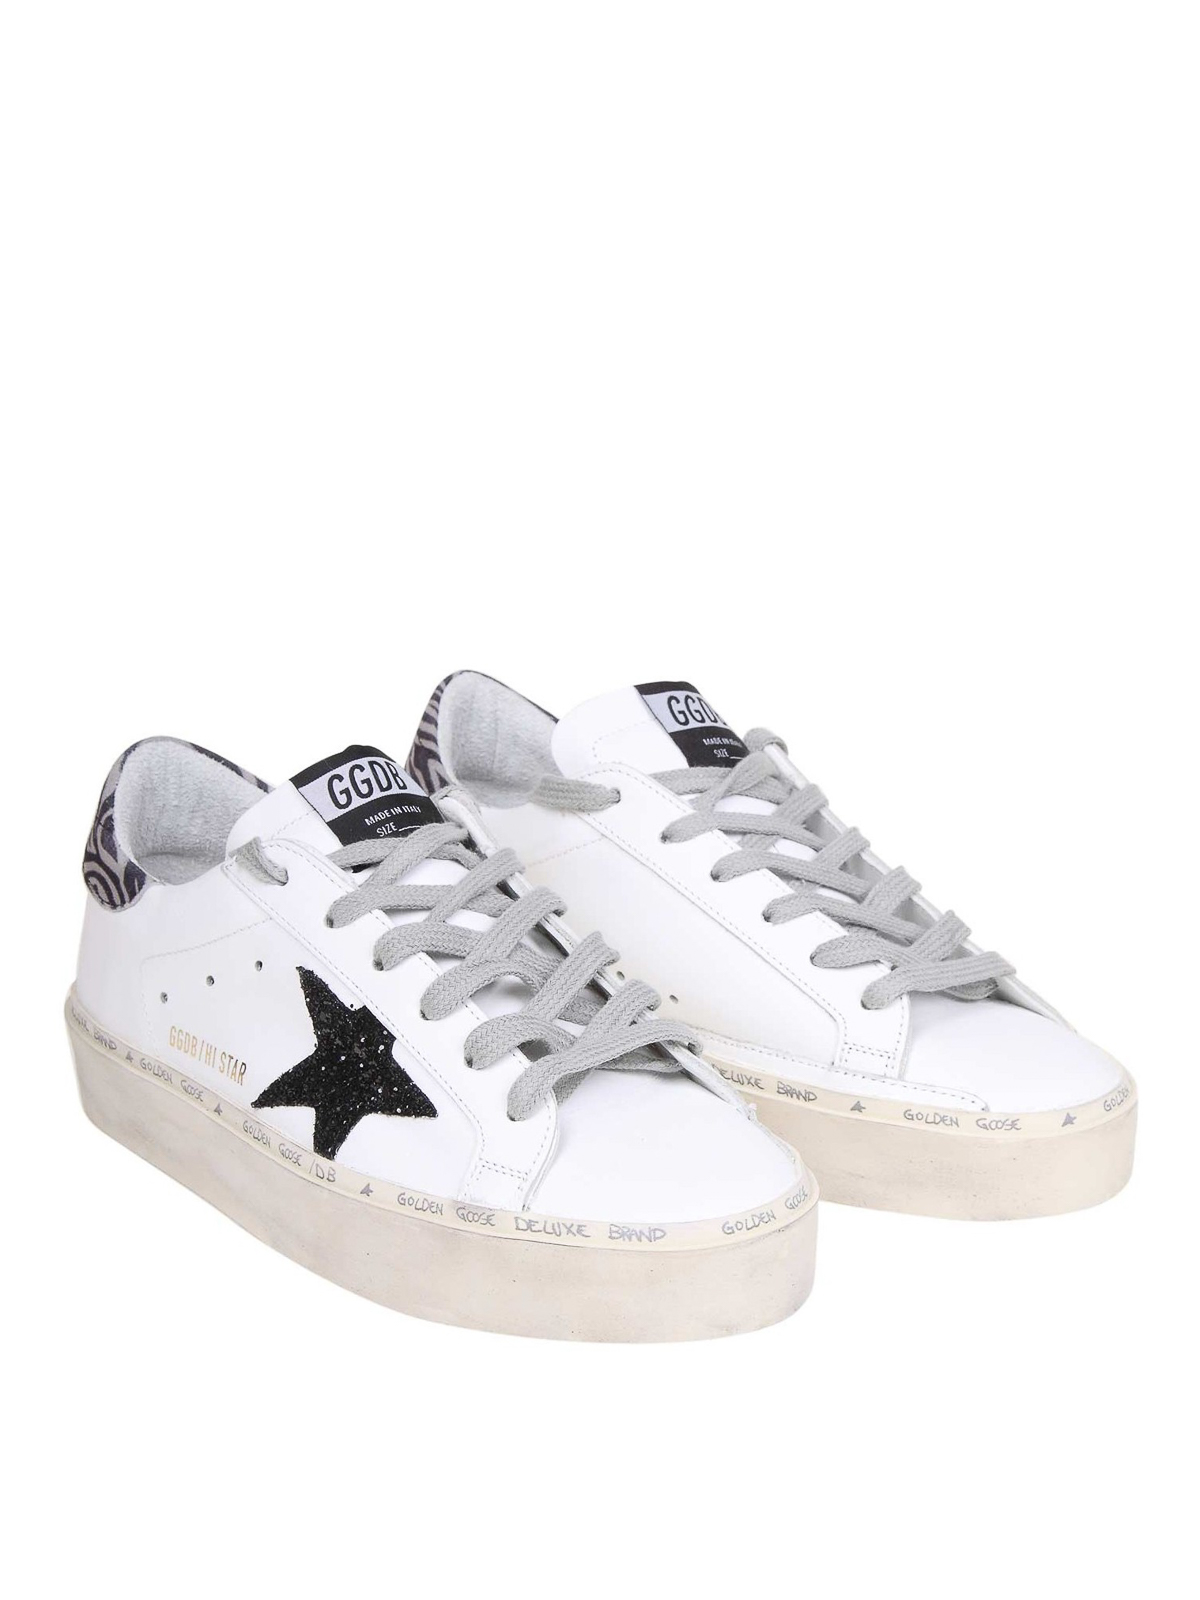 Trainers Golden Goose - Hi Star leather sneakers - G34WS945E7 | iKRIX.com